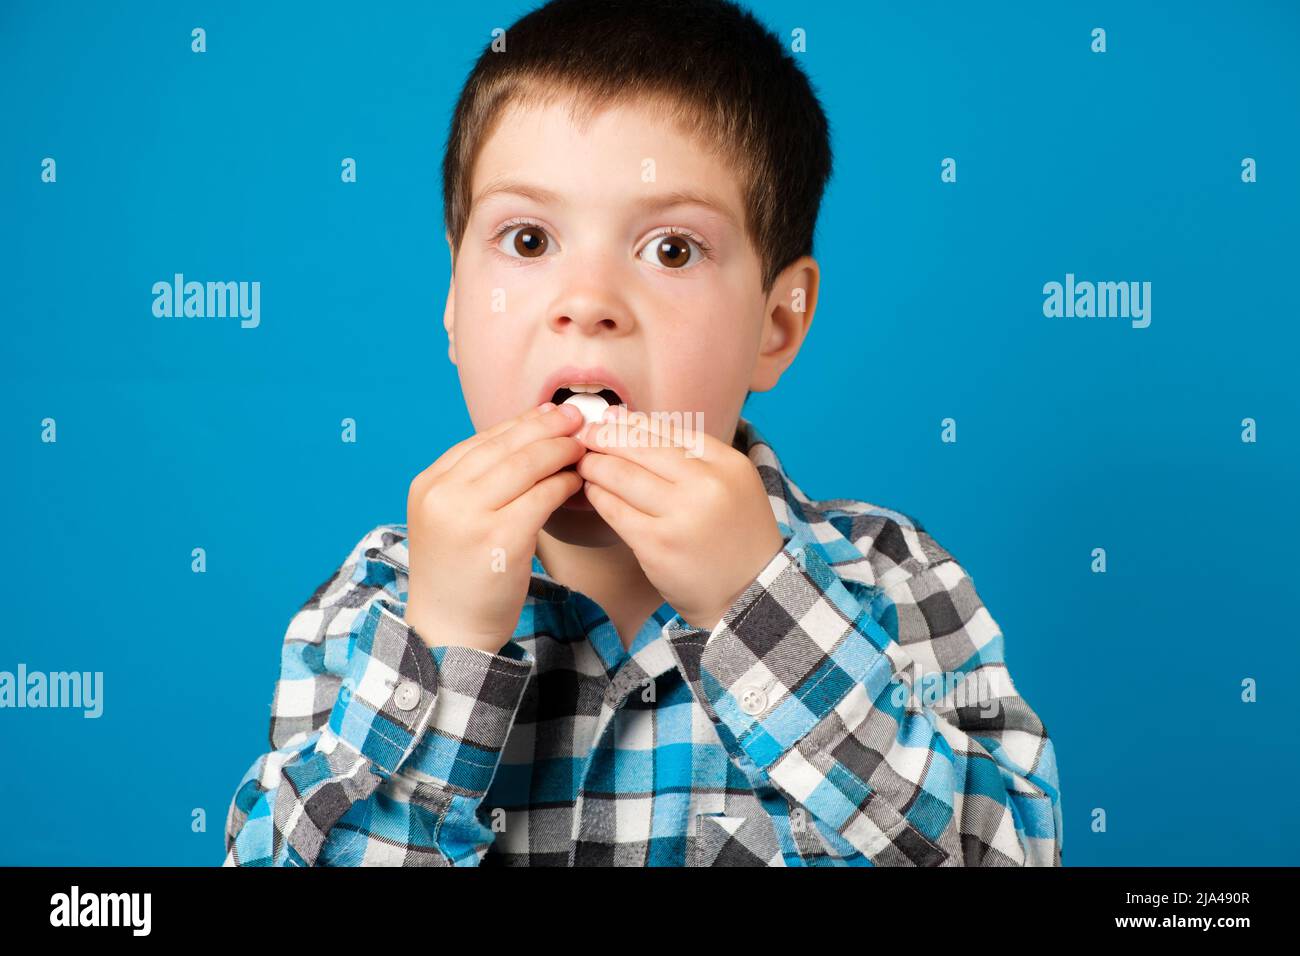 A beautiful preschool boy eats vitamin C or other medicine or dietary supplement on a blue background. Stock Photo